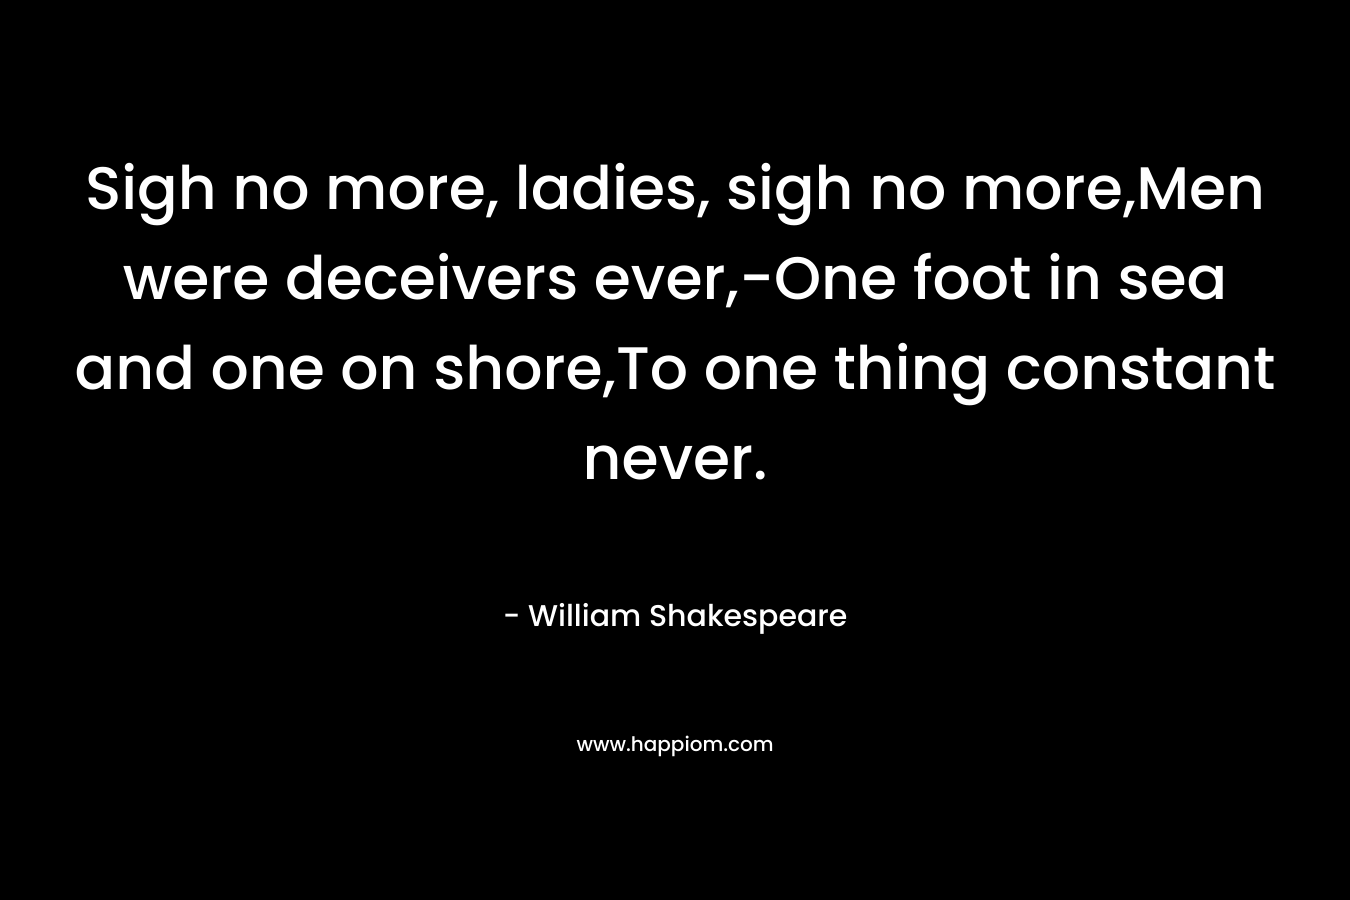 Sigh no more, ladies, sigh no more,Men were deceivers ever,-One foot in sea and one on shore,To one thing constant never. – William Shakespeare